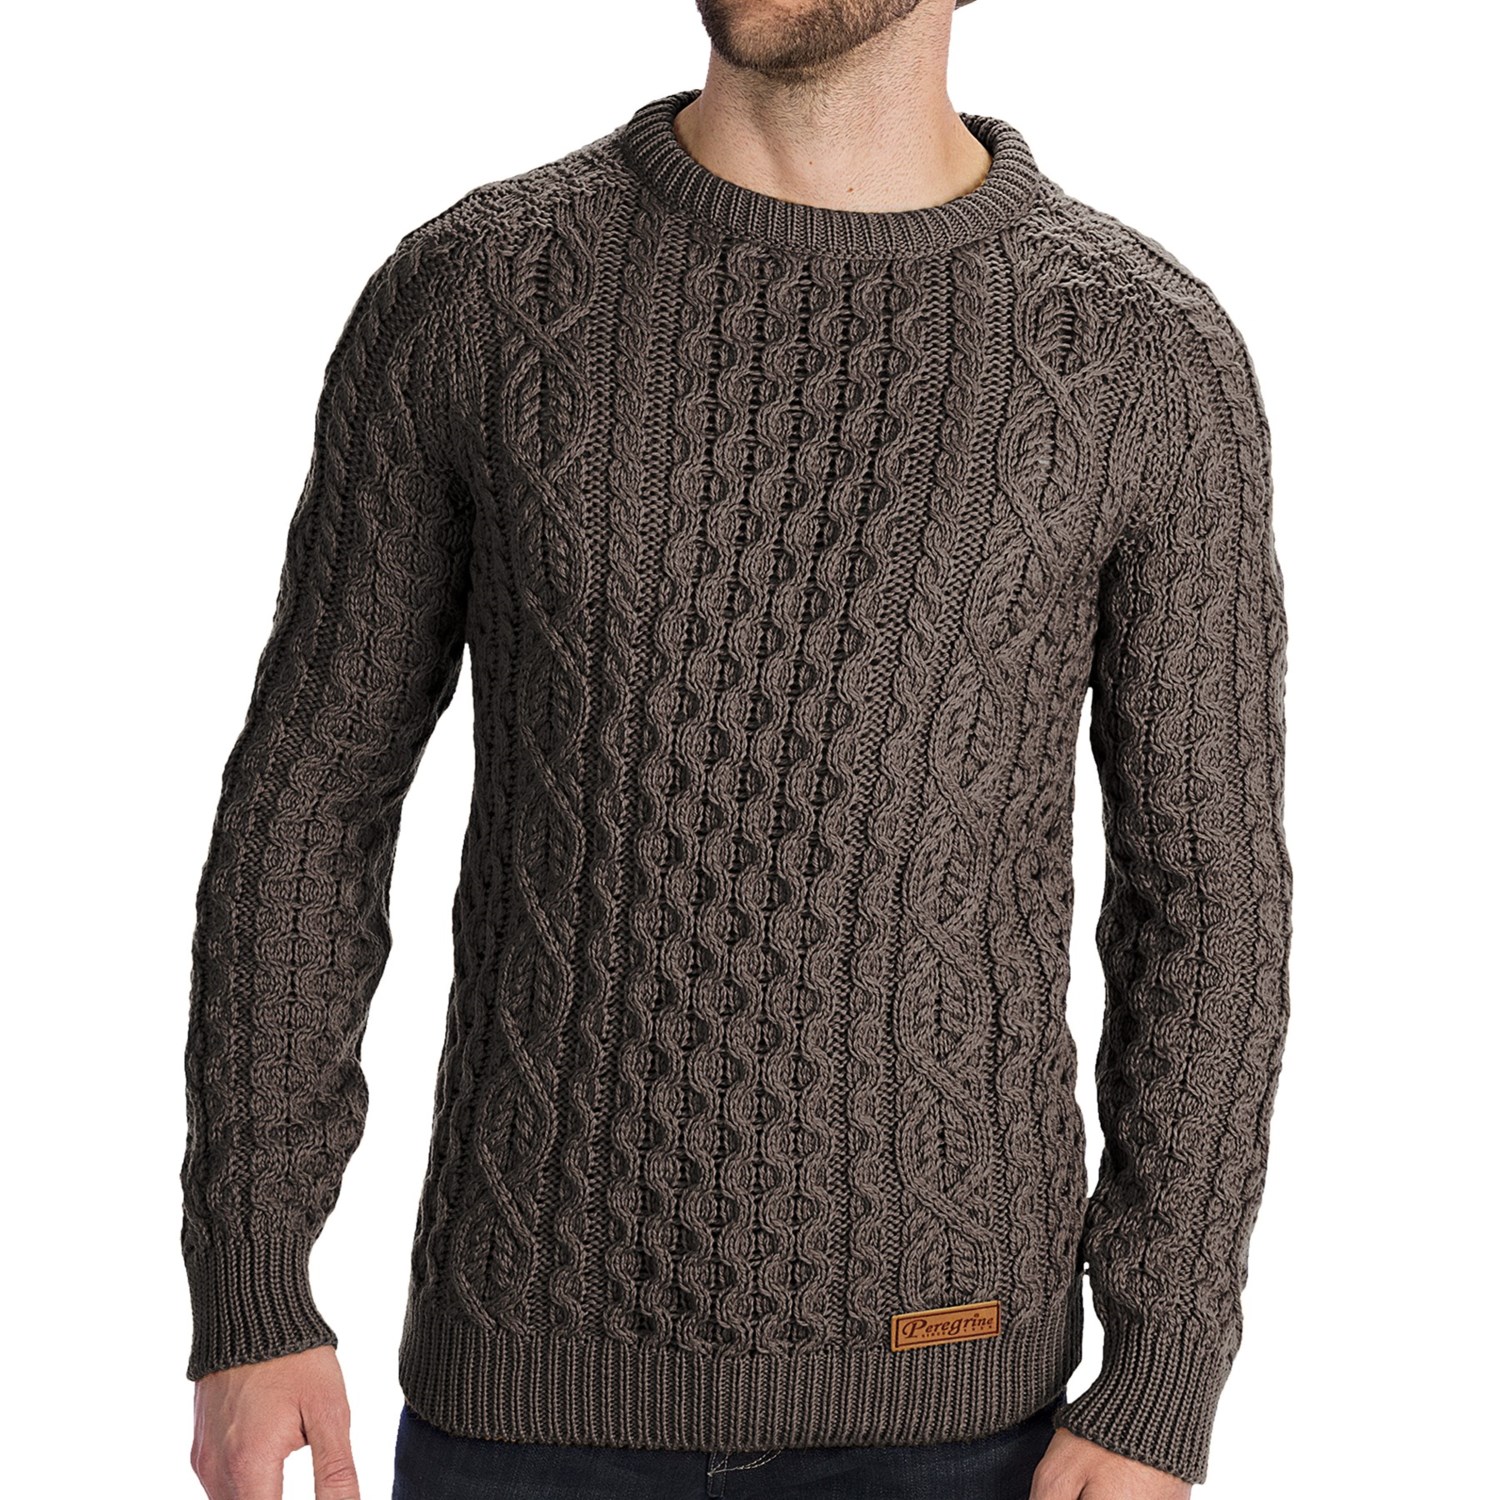 Peregrine by J.G. Glover Aran Knit Sweater (For Men) 6113D - Save 74%